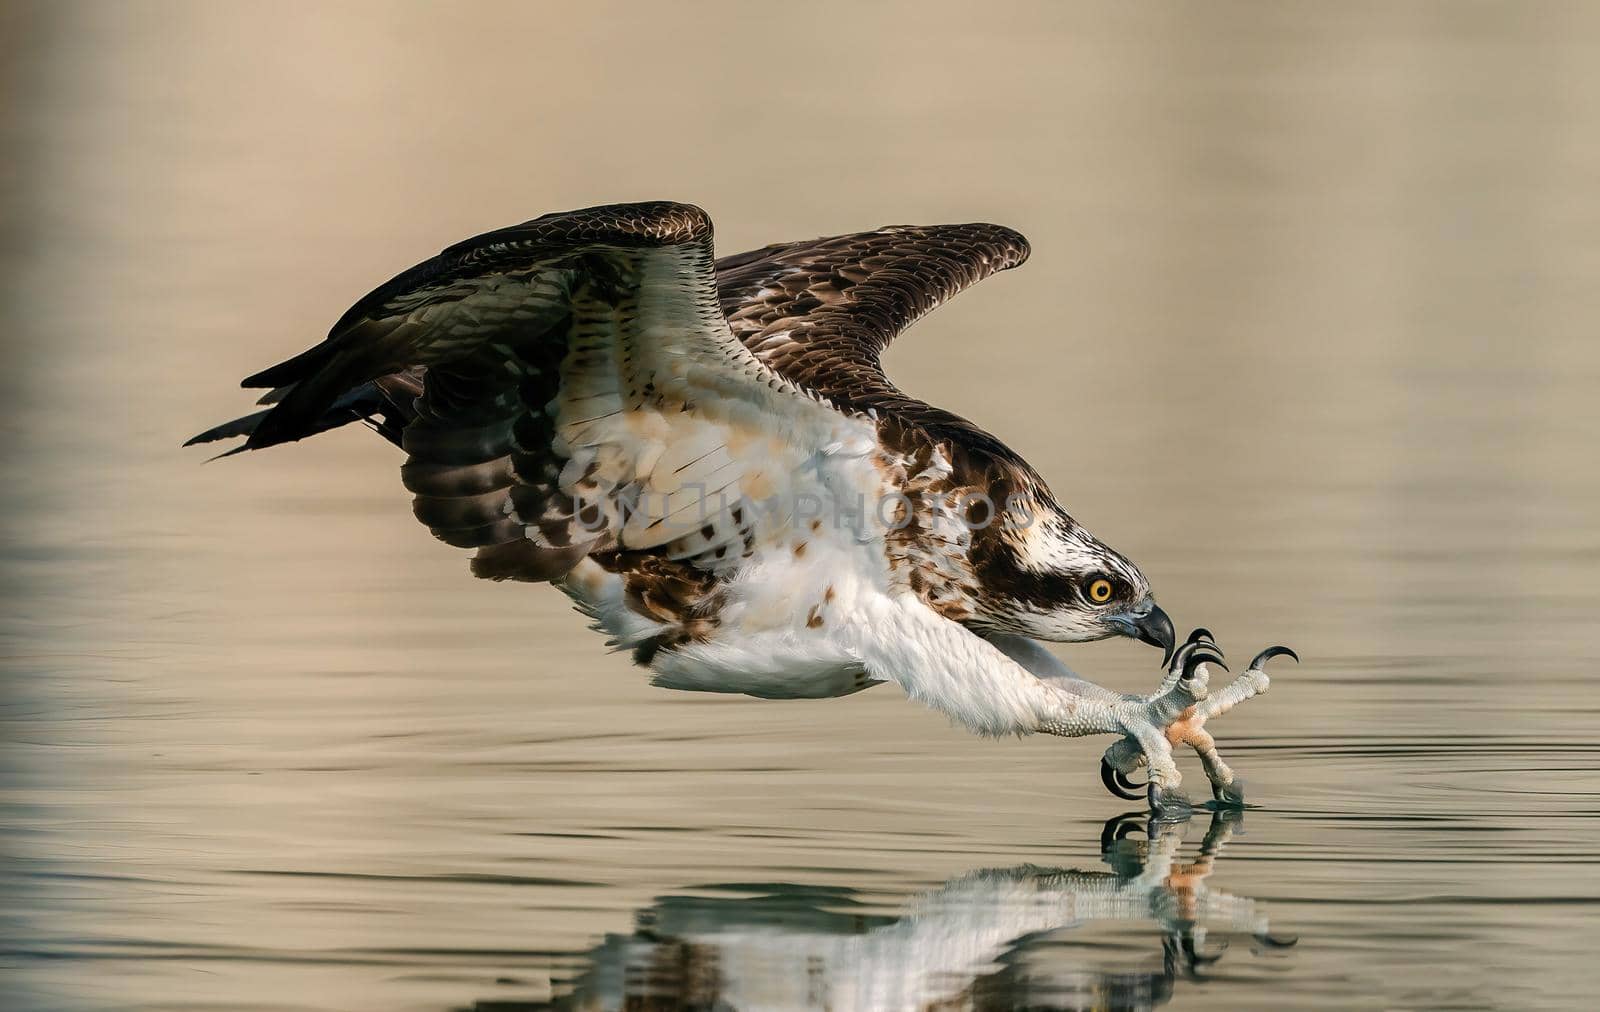 Eagle flying with a fish in its talons, eagle fishing, Close up of bird hunting near the water. by isaiphoto